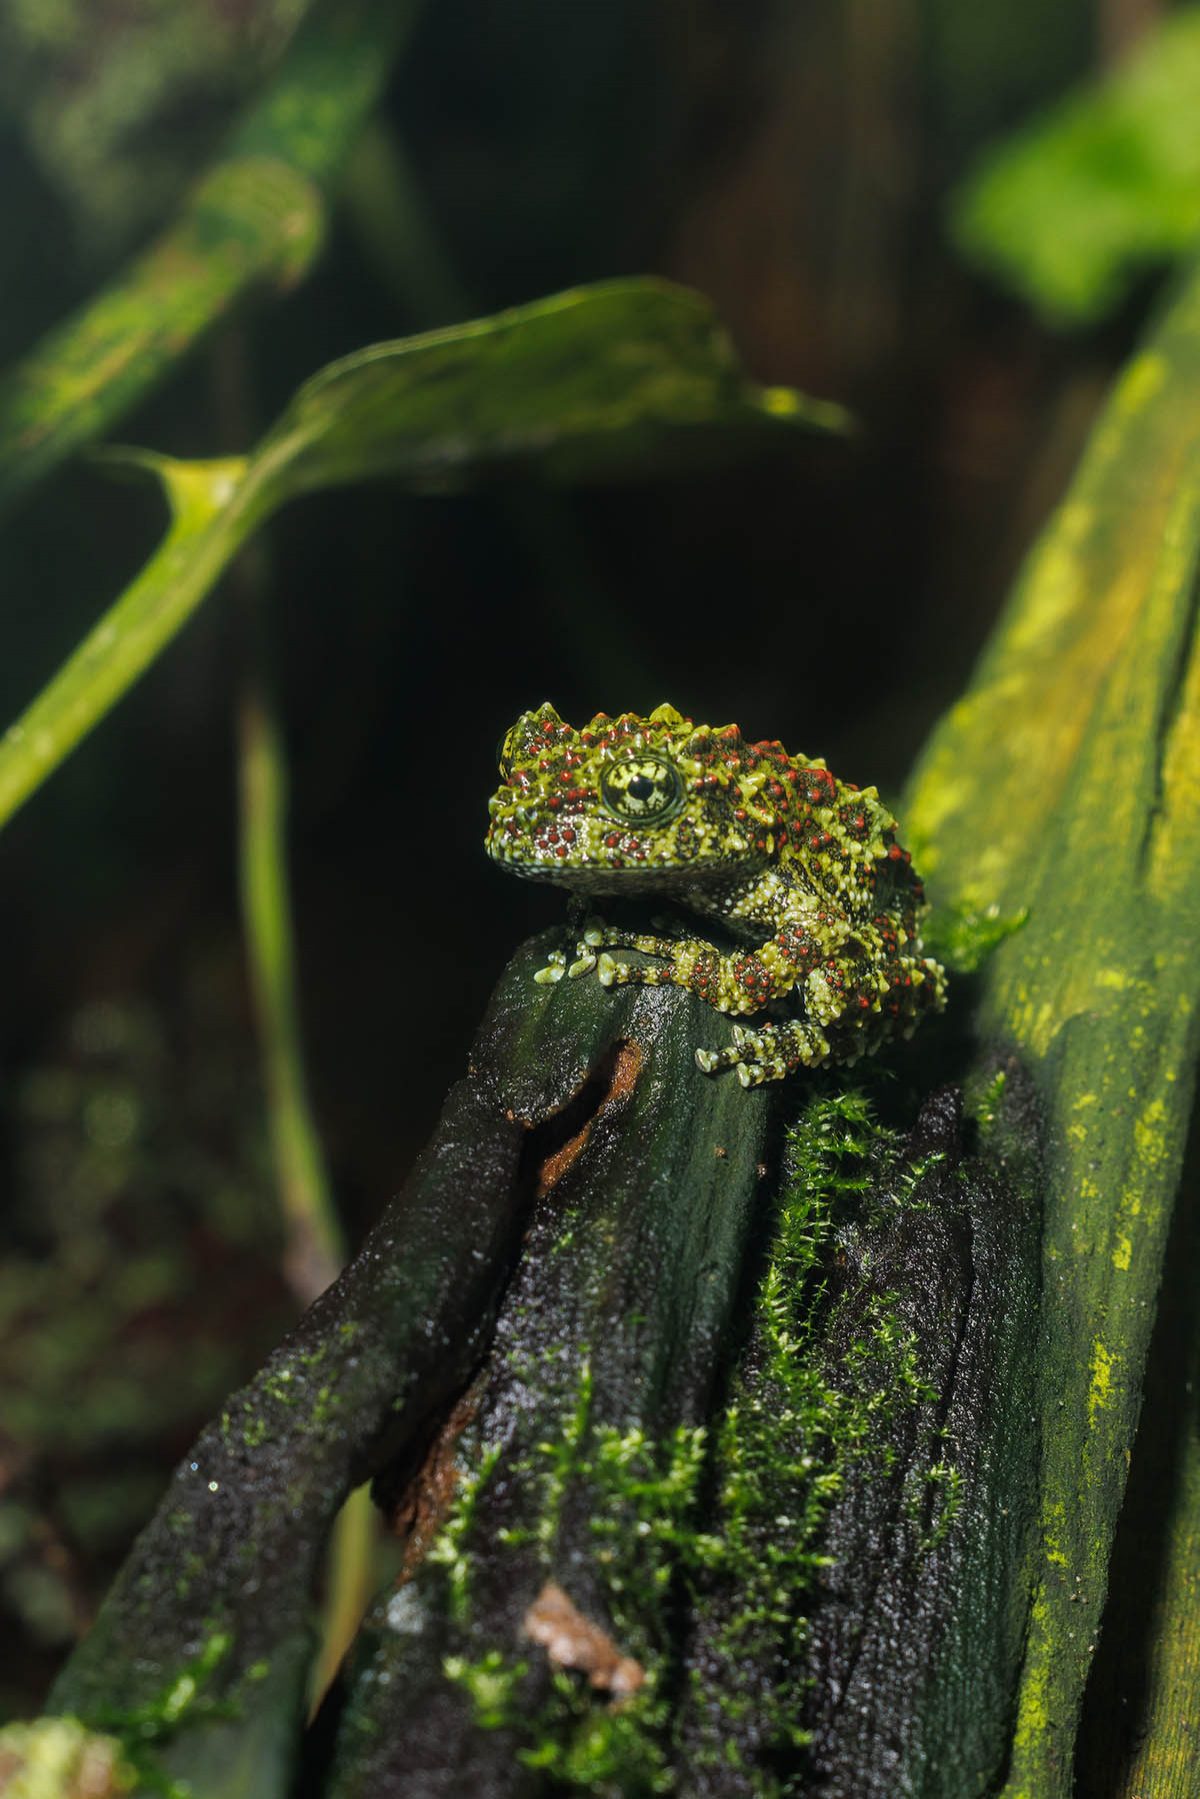 A Vietnamese Mossy Frog in Tennessee Aquarium’s Rivers of the World gallery.